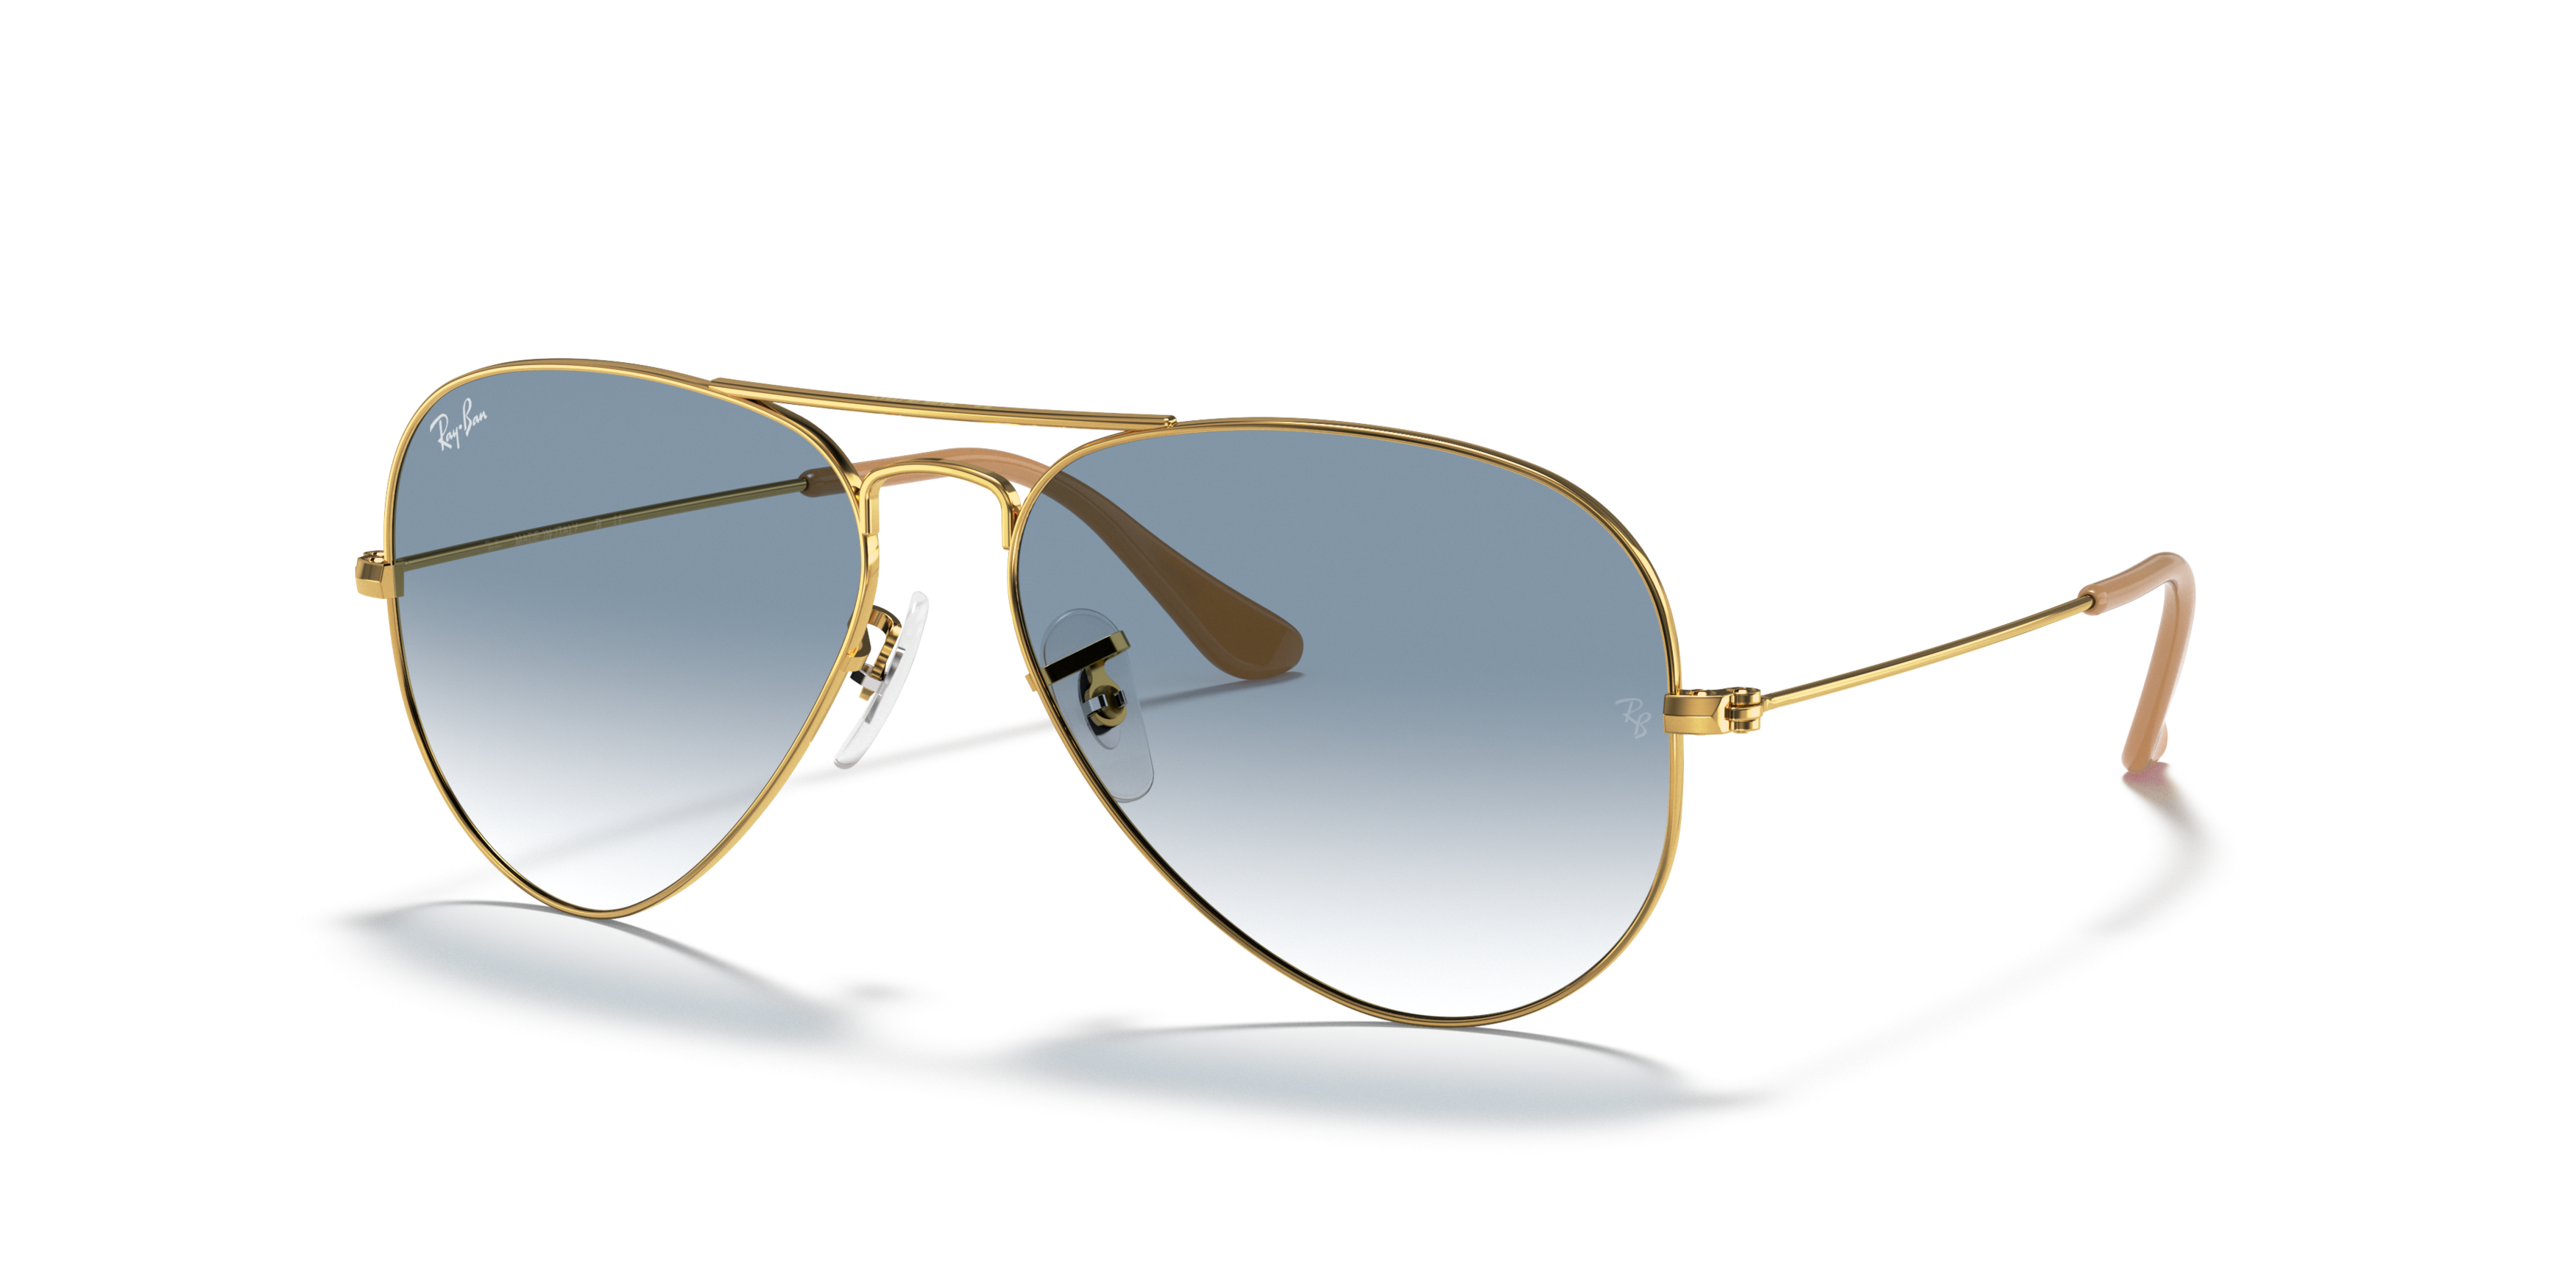 Angle_Left01 Ray-Ban RB 3025 (001/3F) Sunglasses Blue / Gold